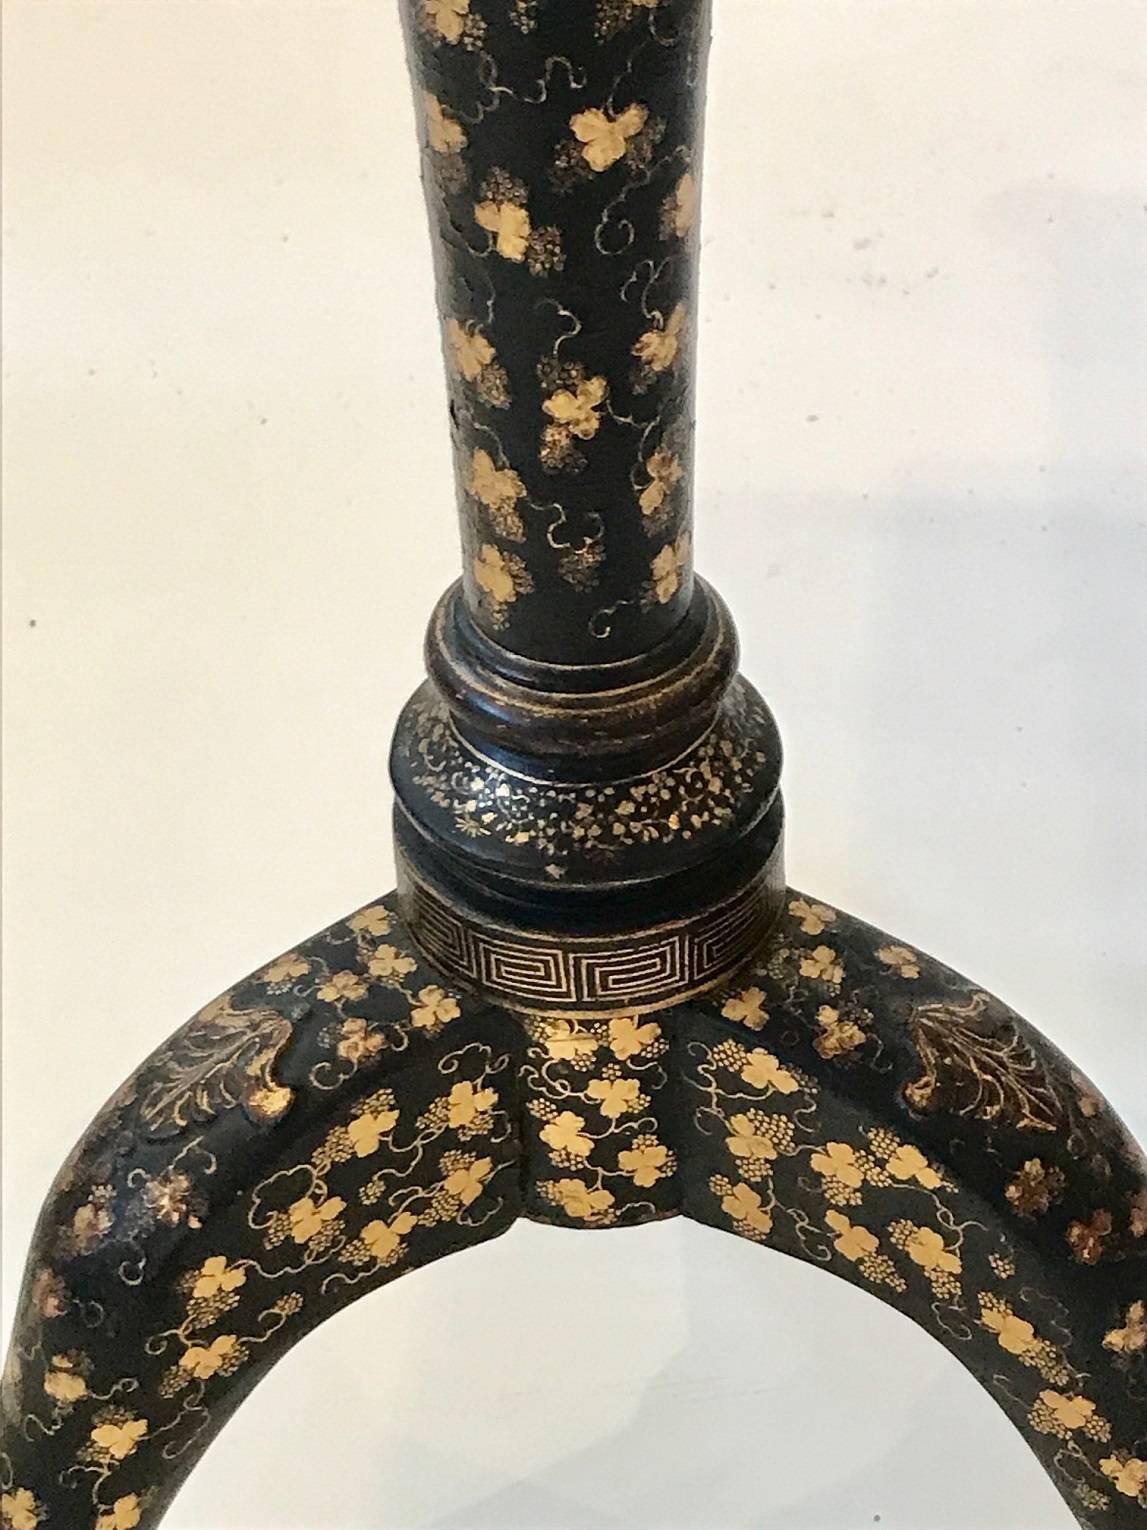 Charming export tilt top table in black lacquer with gilt and foliate stencil decoration tripod base with modified ball and claw feet; nicely detail bird cage support on turned baluster-form pedestal.